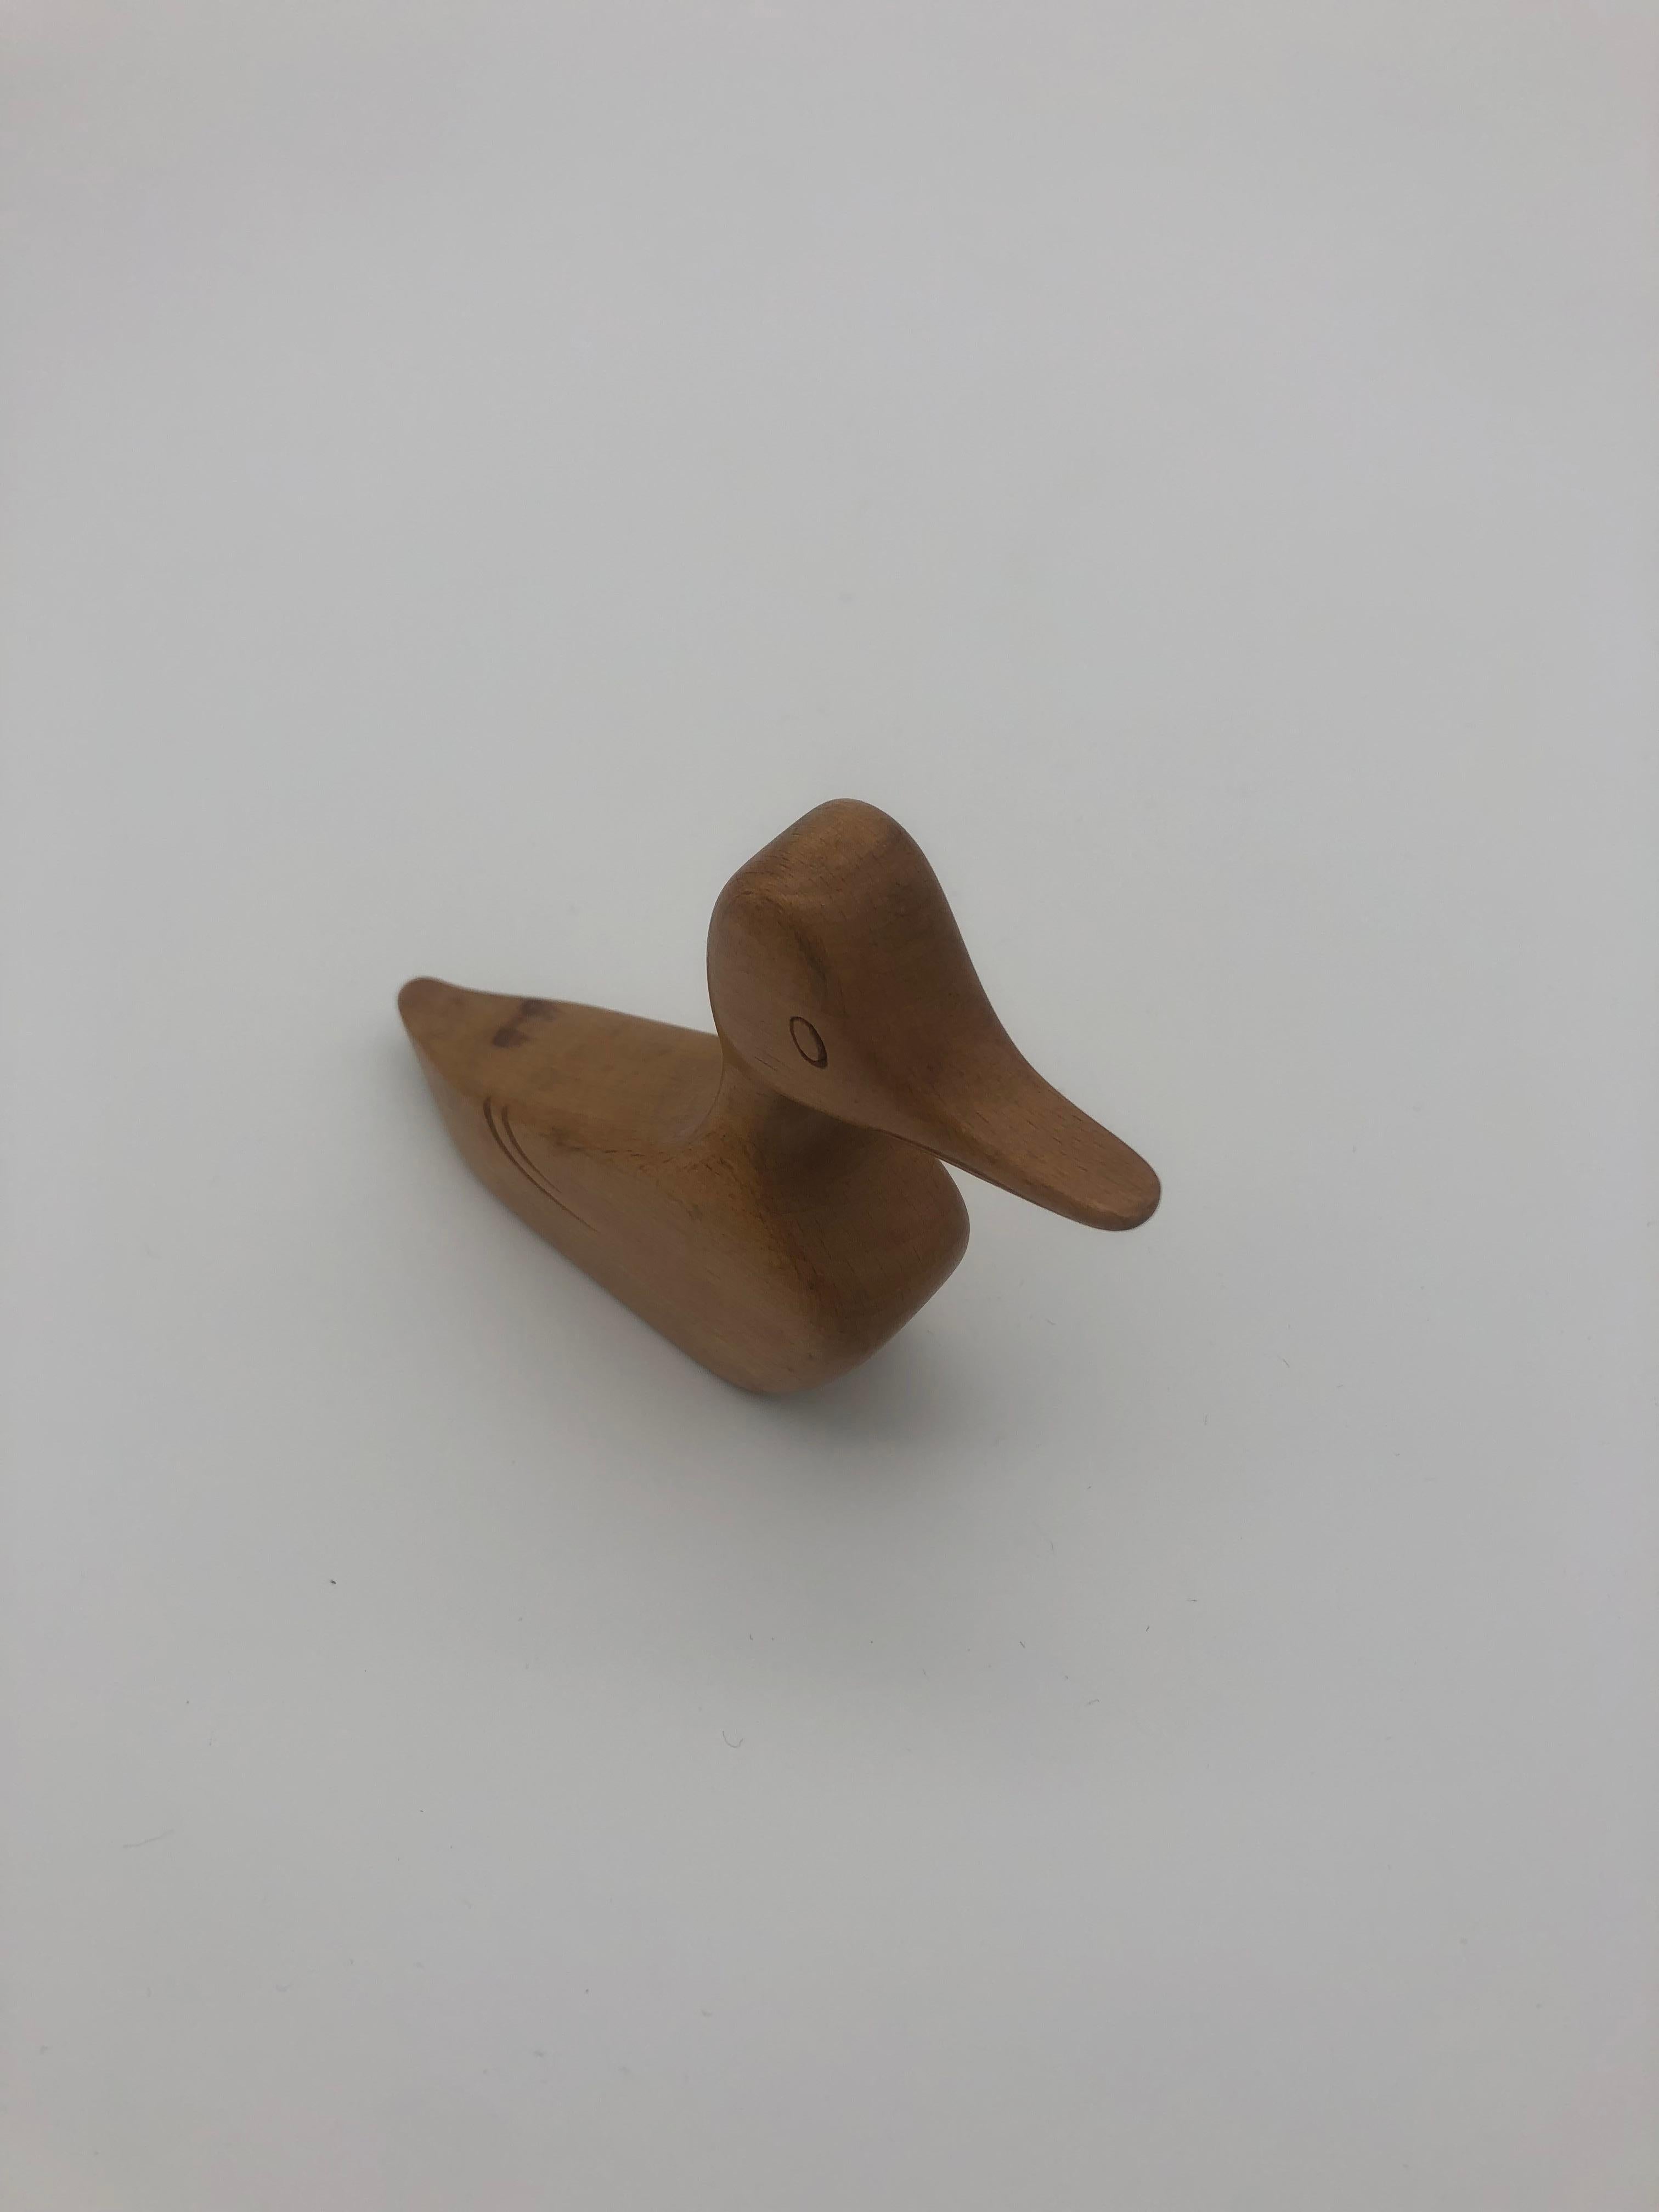 Wonderful hand-carved wooden duck.
Small carved details for the eyes, spout and wings.
Beautiful wood grain.
The spots on the back and the belly look to be branch-marks from the wood.

Fully marked WHW in a circle, Made in Austria and Hagenauer